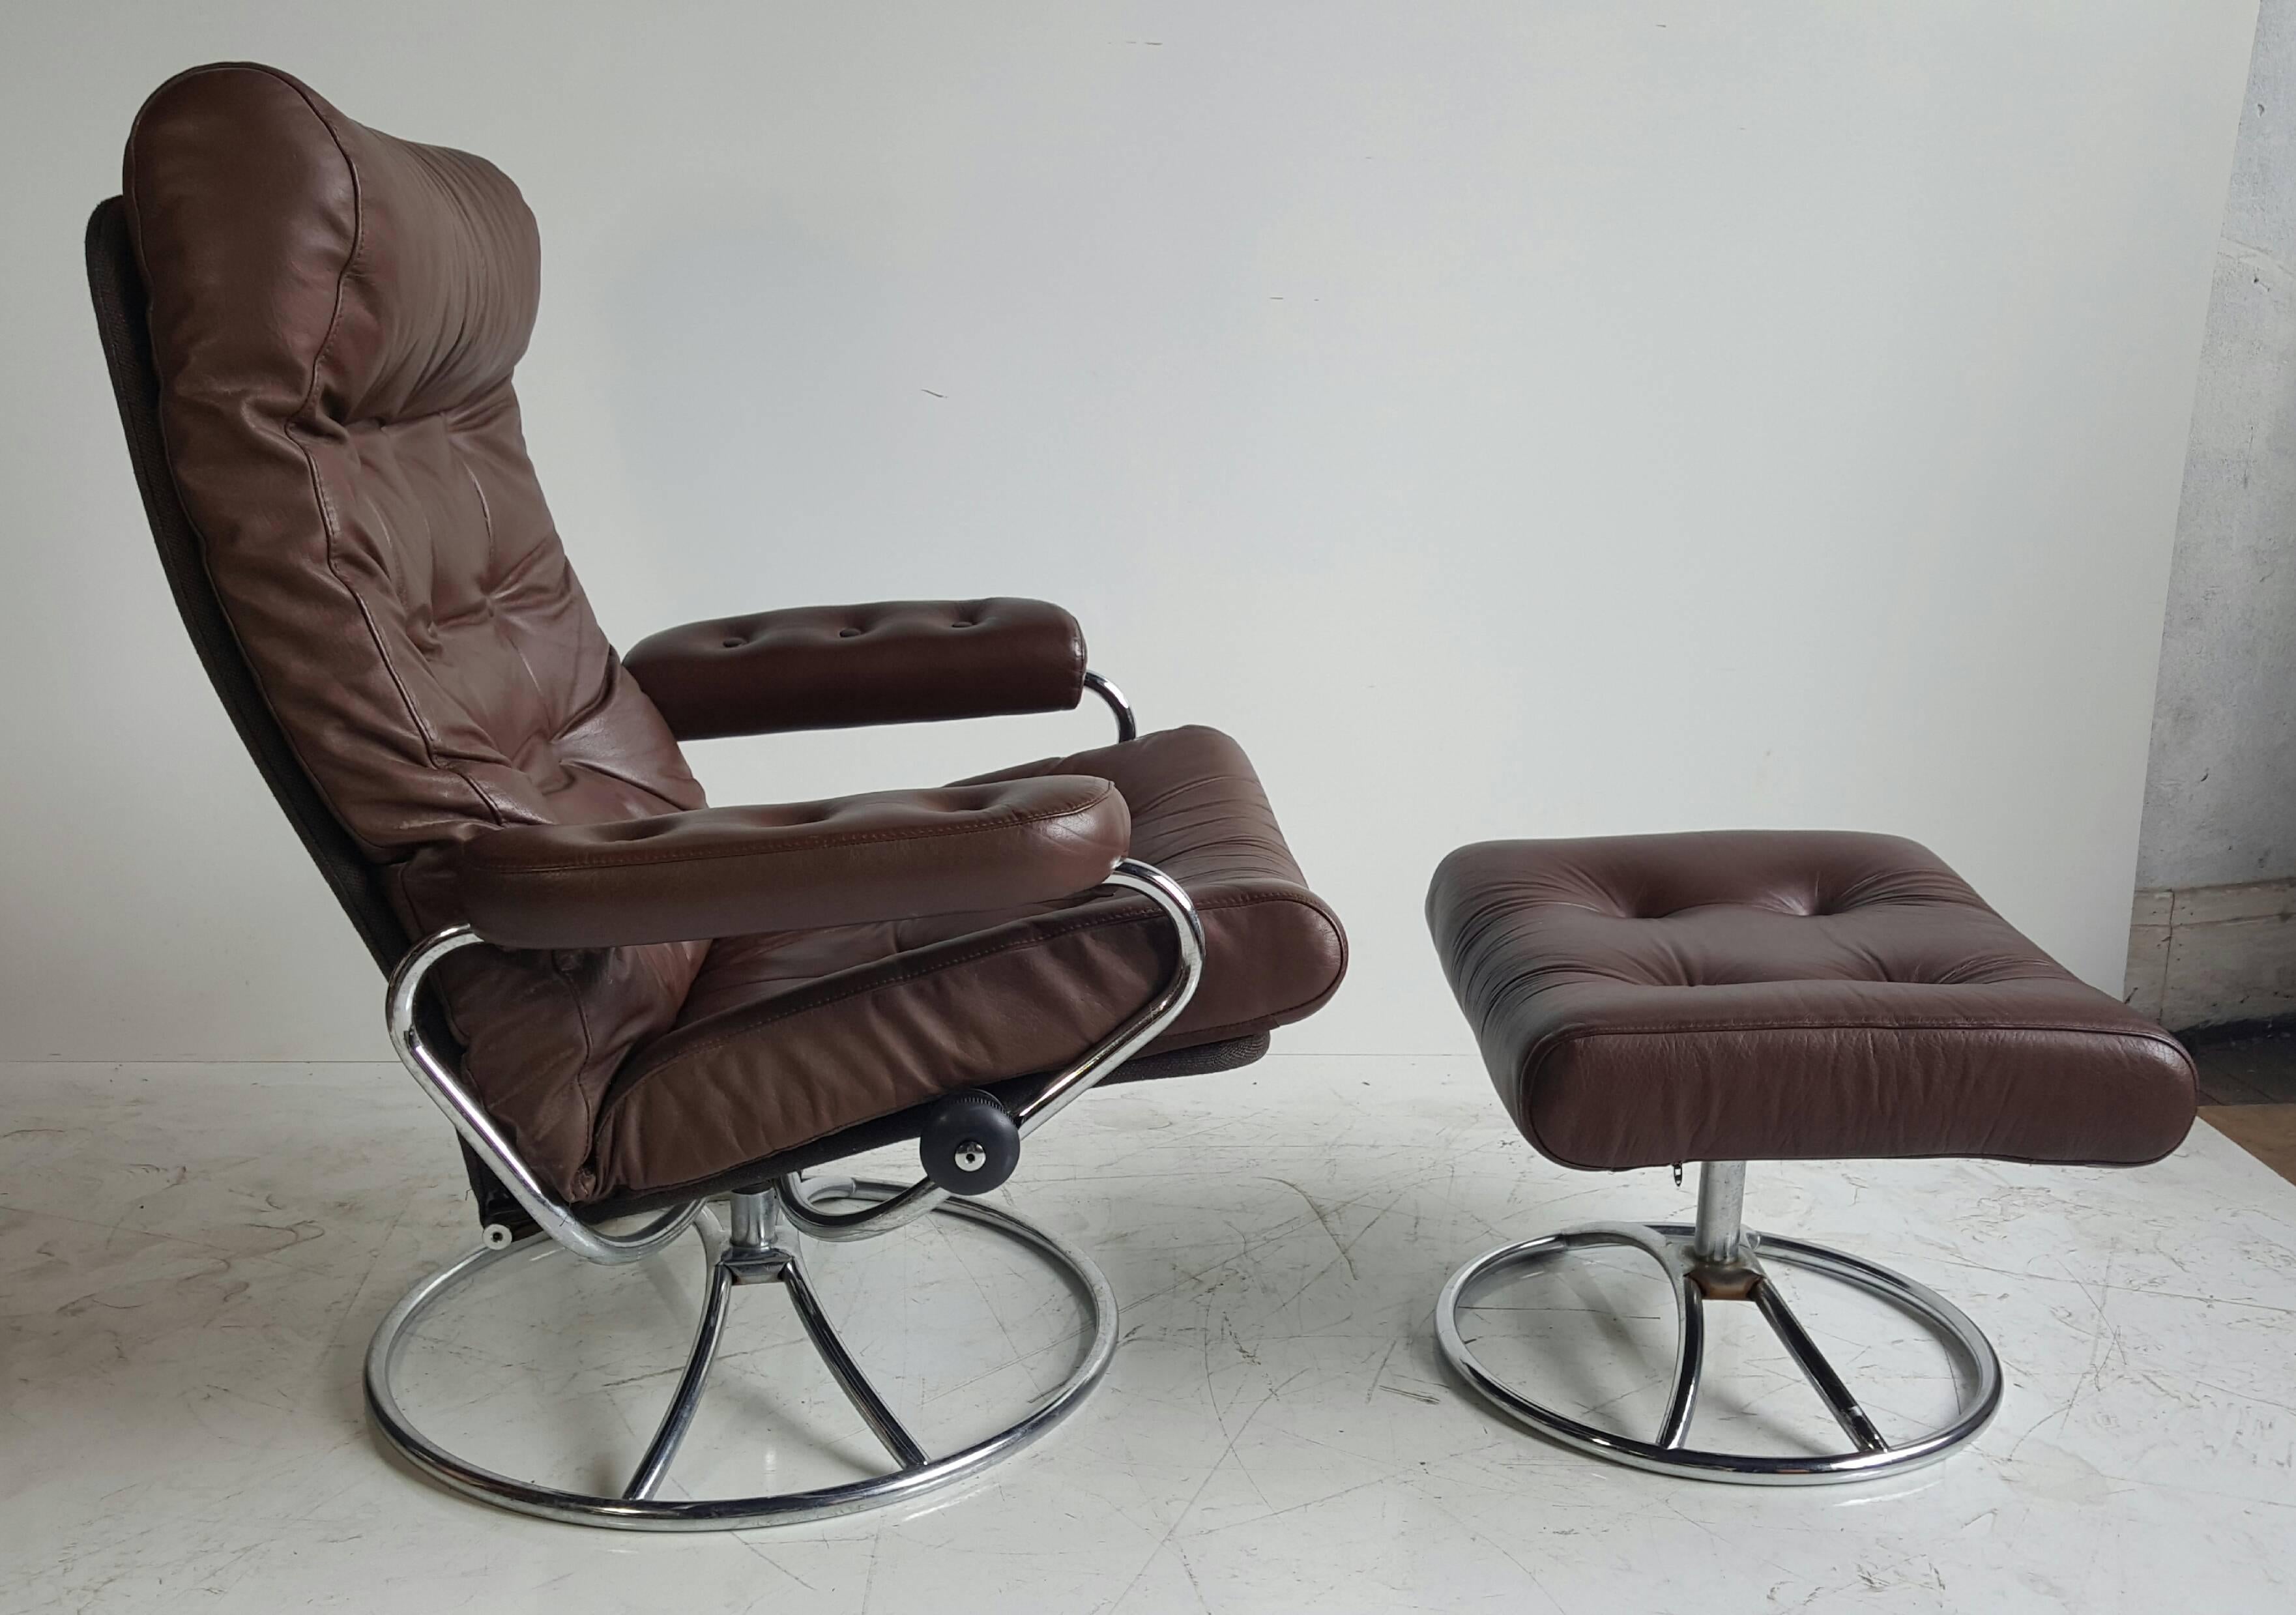 Vintage Ekornes Stressless recliner and ottoman made in Norway. Features button-tufted leather with roll-neck support and brown tweed fabric back around a chrome frame. Fully reclining and adjustable. Turning locking knobs on both sides for